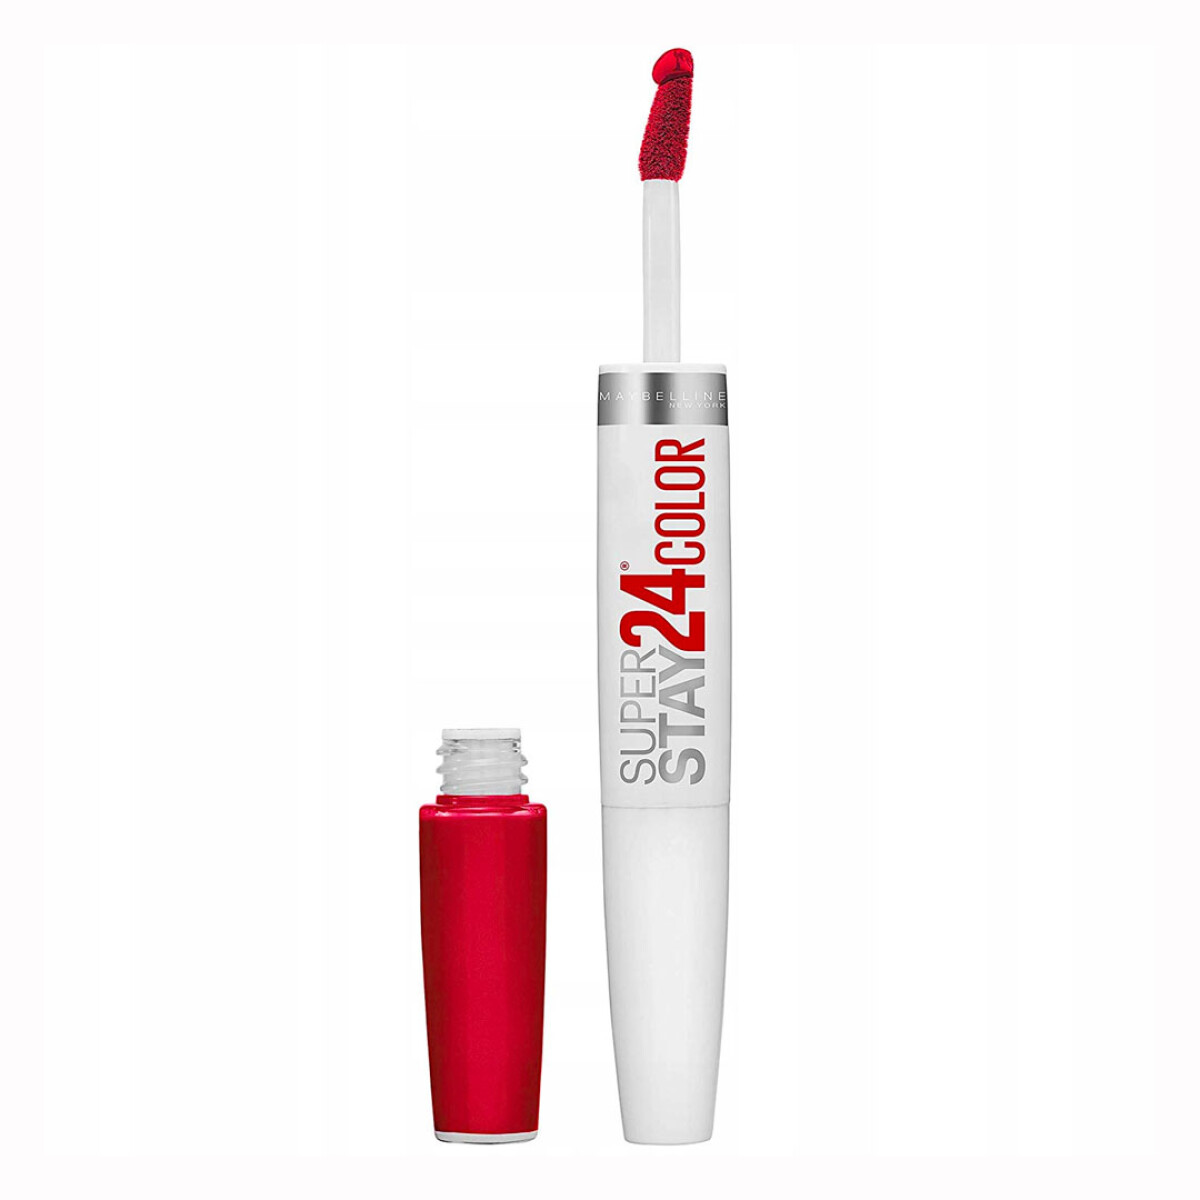 Maybelline Labial Liquido Superstay 24 hrs - Optic Ruby nº310 